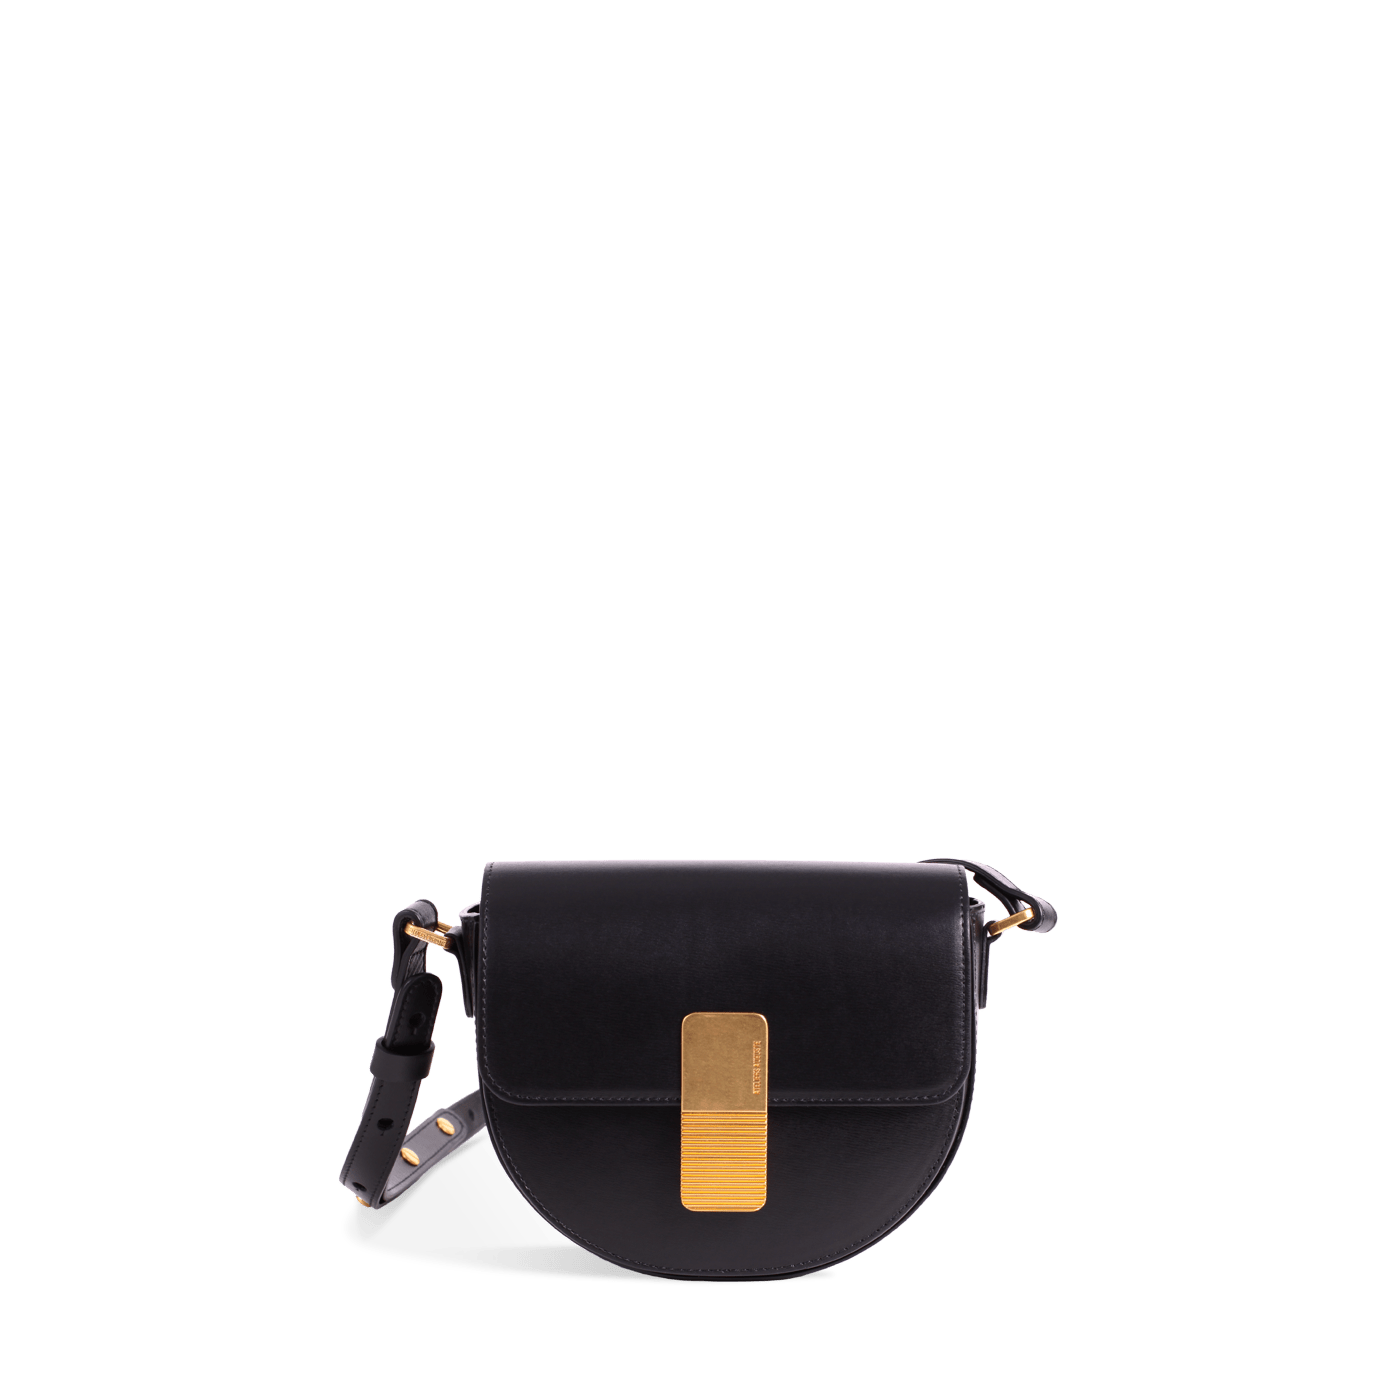 Mini Monceau Crossbody Gold Edition - Black Box Leather with